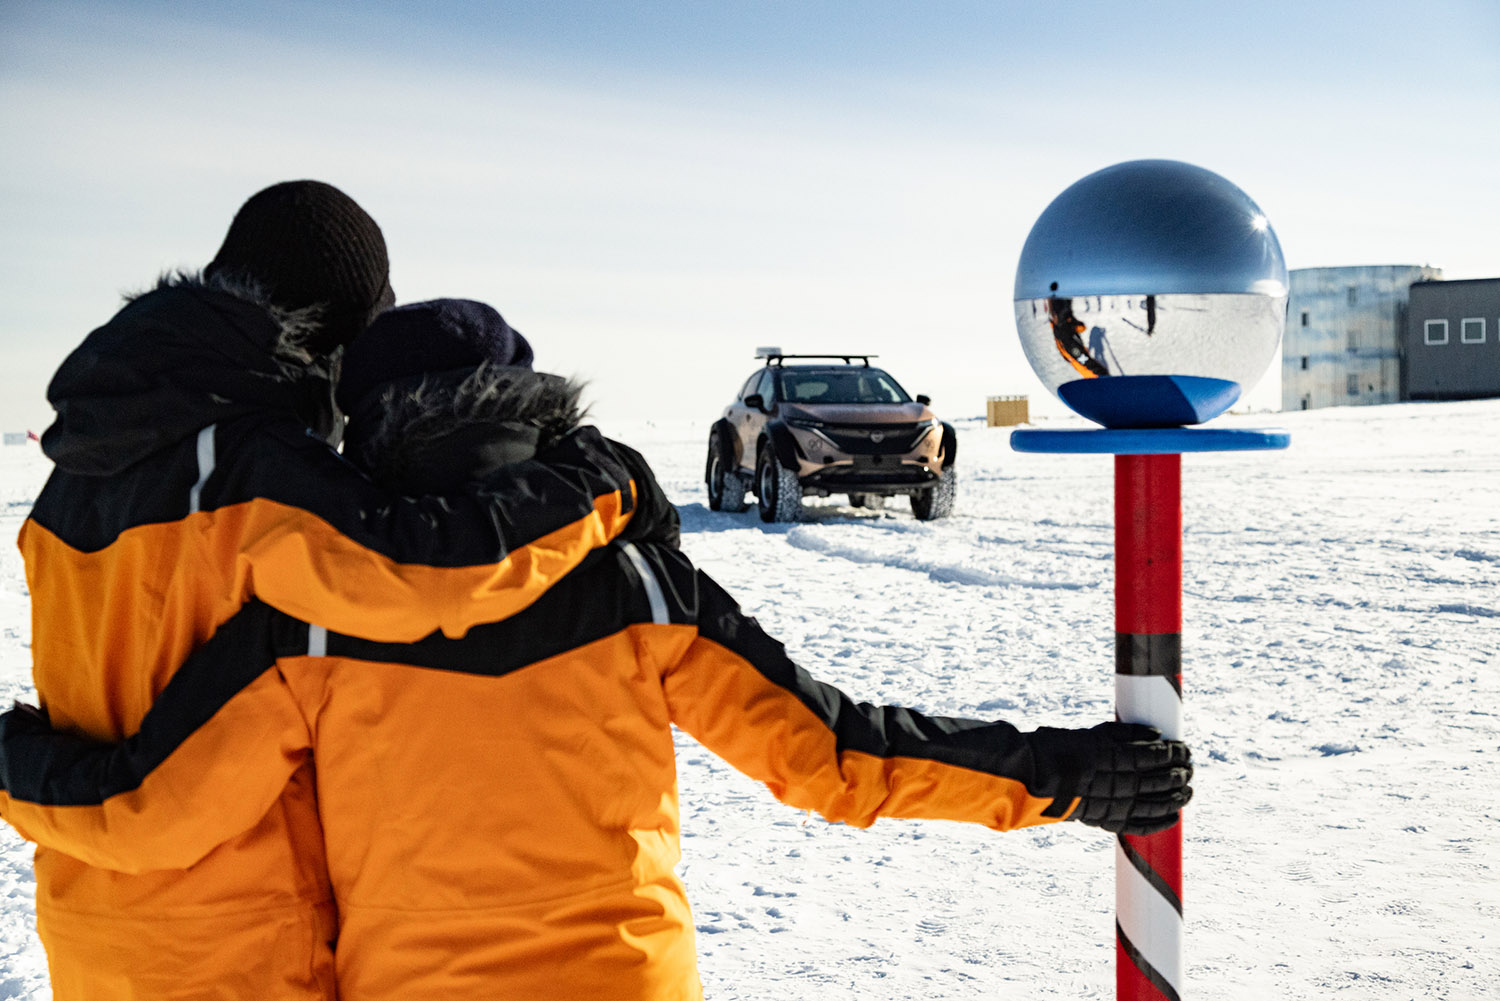 Chris and Julie Ramsey at the South Pole in Antarctica with their Nissan Ariya